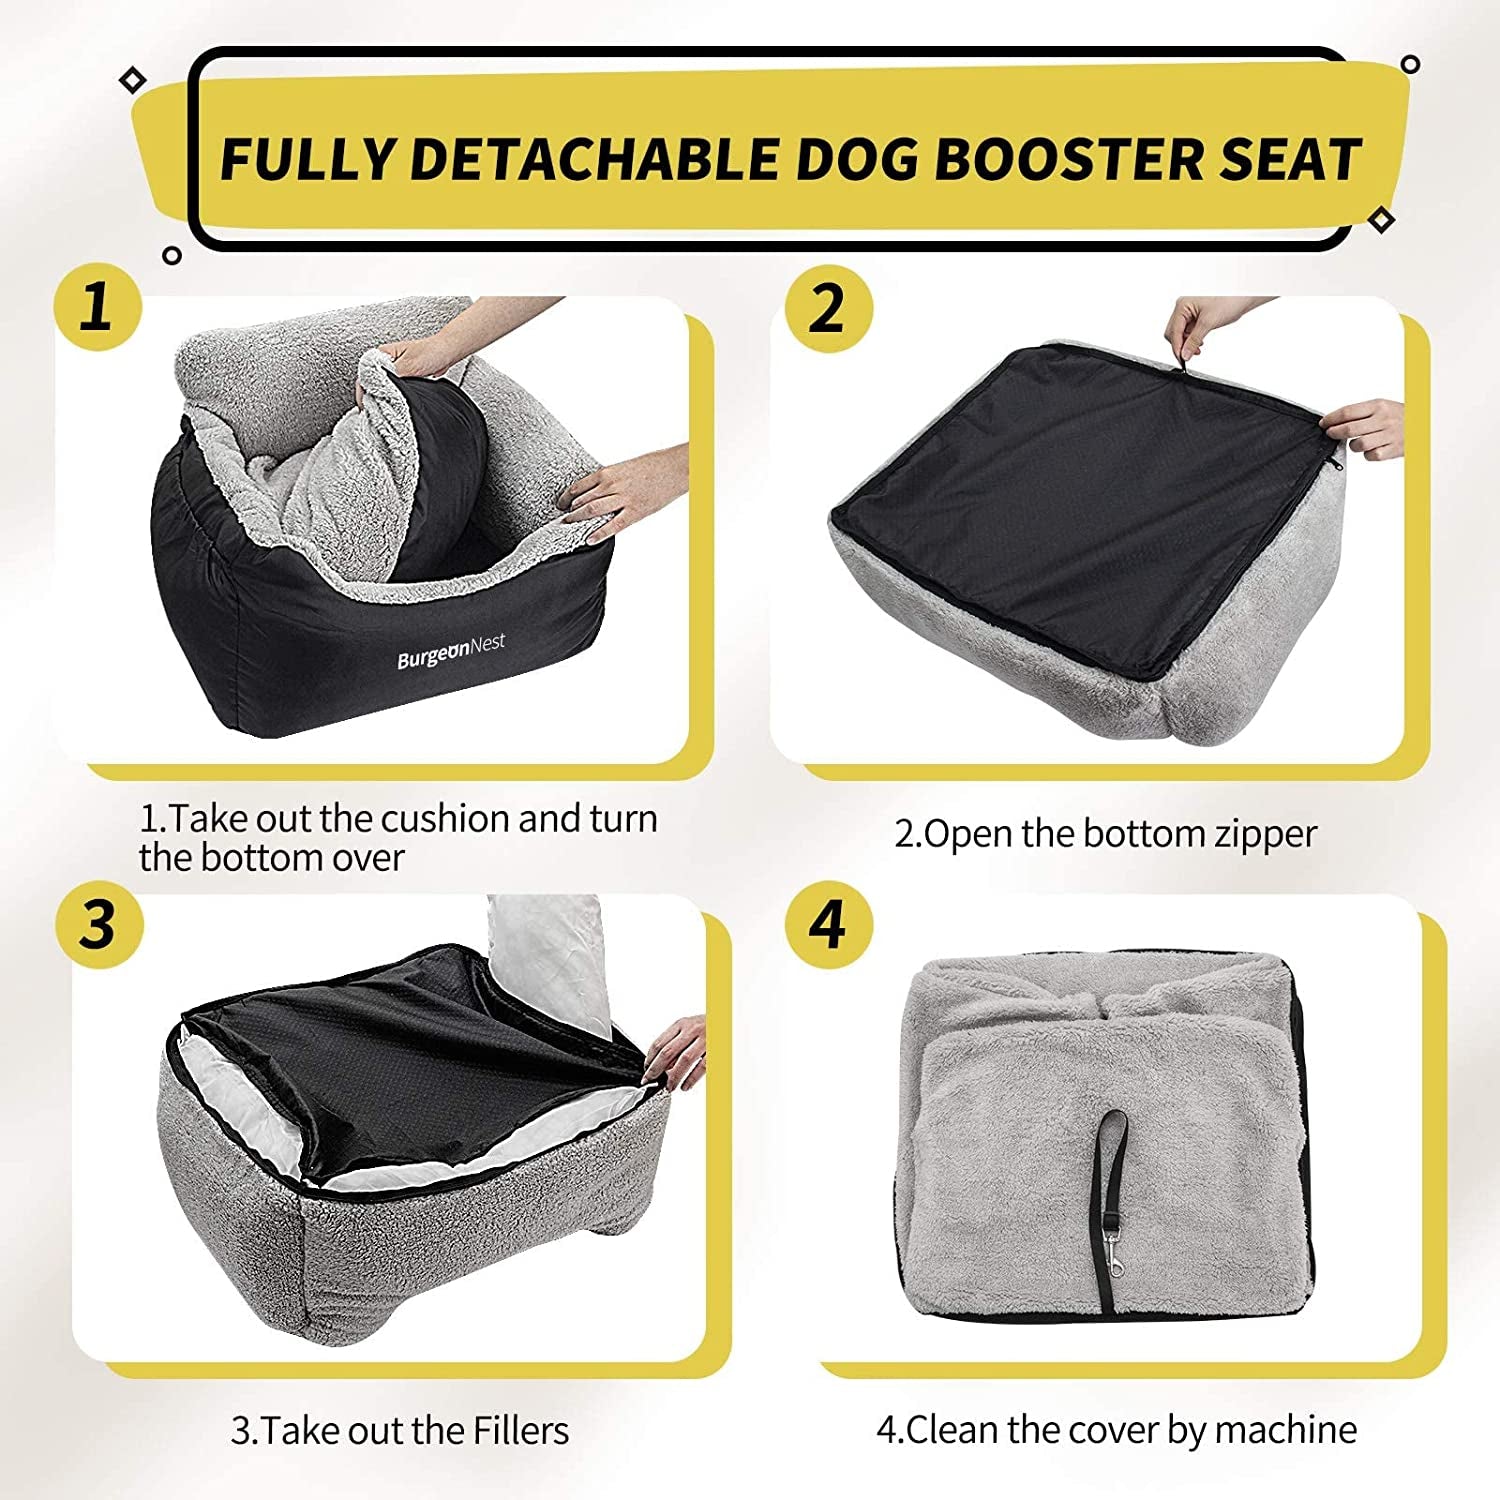 Burgeonnest Dog Car Seat for Small Dogs, Fully Detachable and Washable Dog Carseats Small under 25, Soft Dog Booster Seats with Storage Pockets and Clip-On Leash Portable Dog Car Travel Carrier Bed